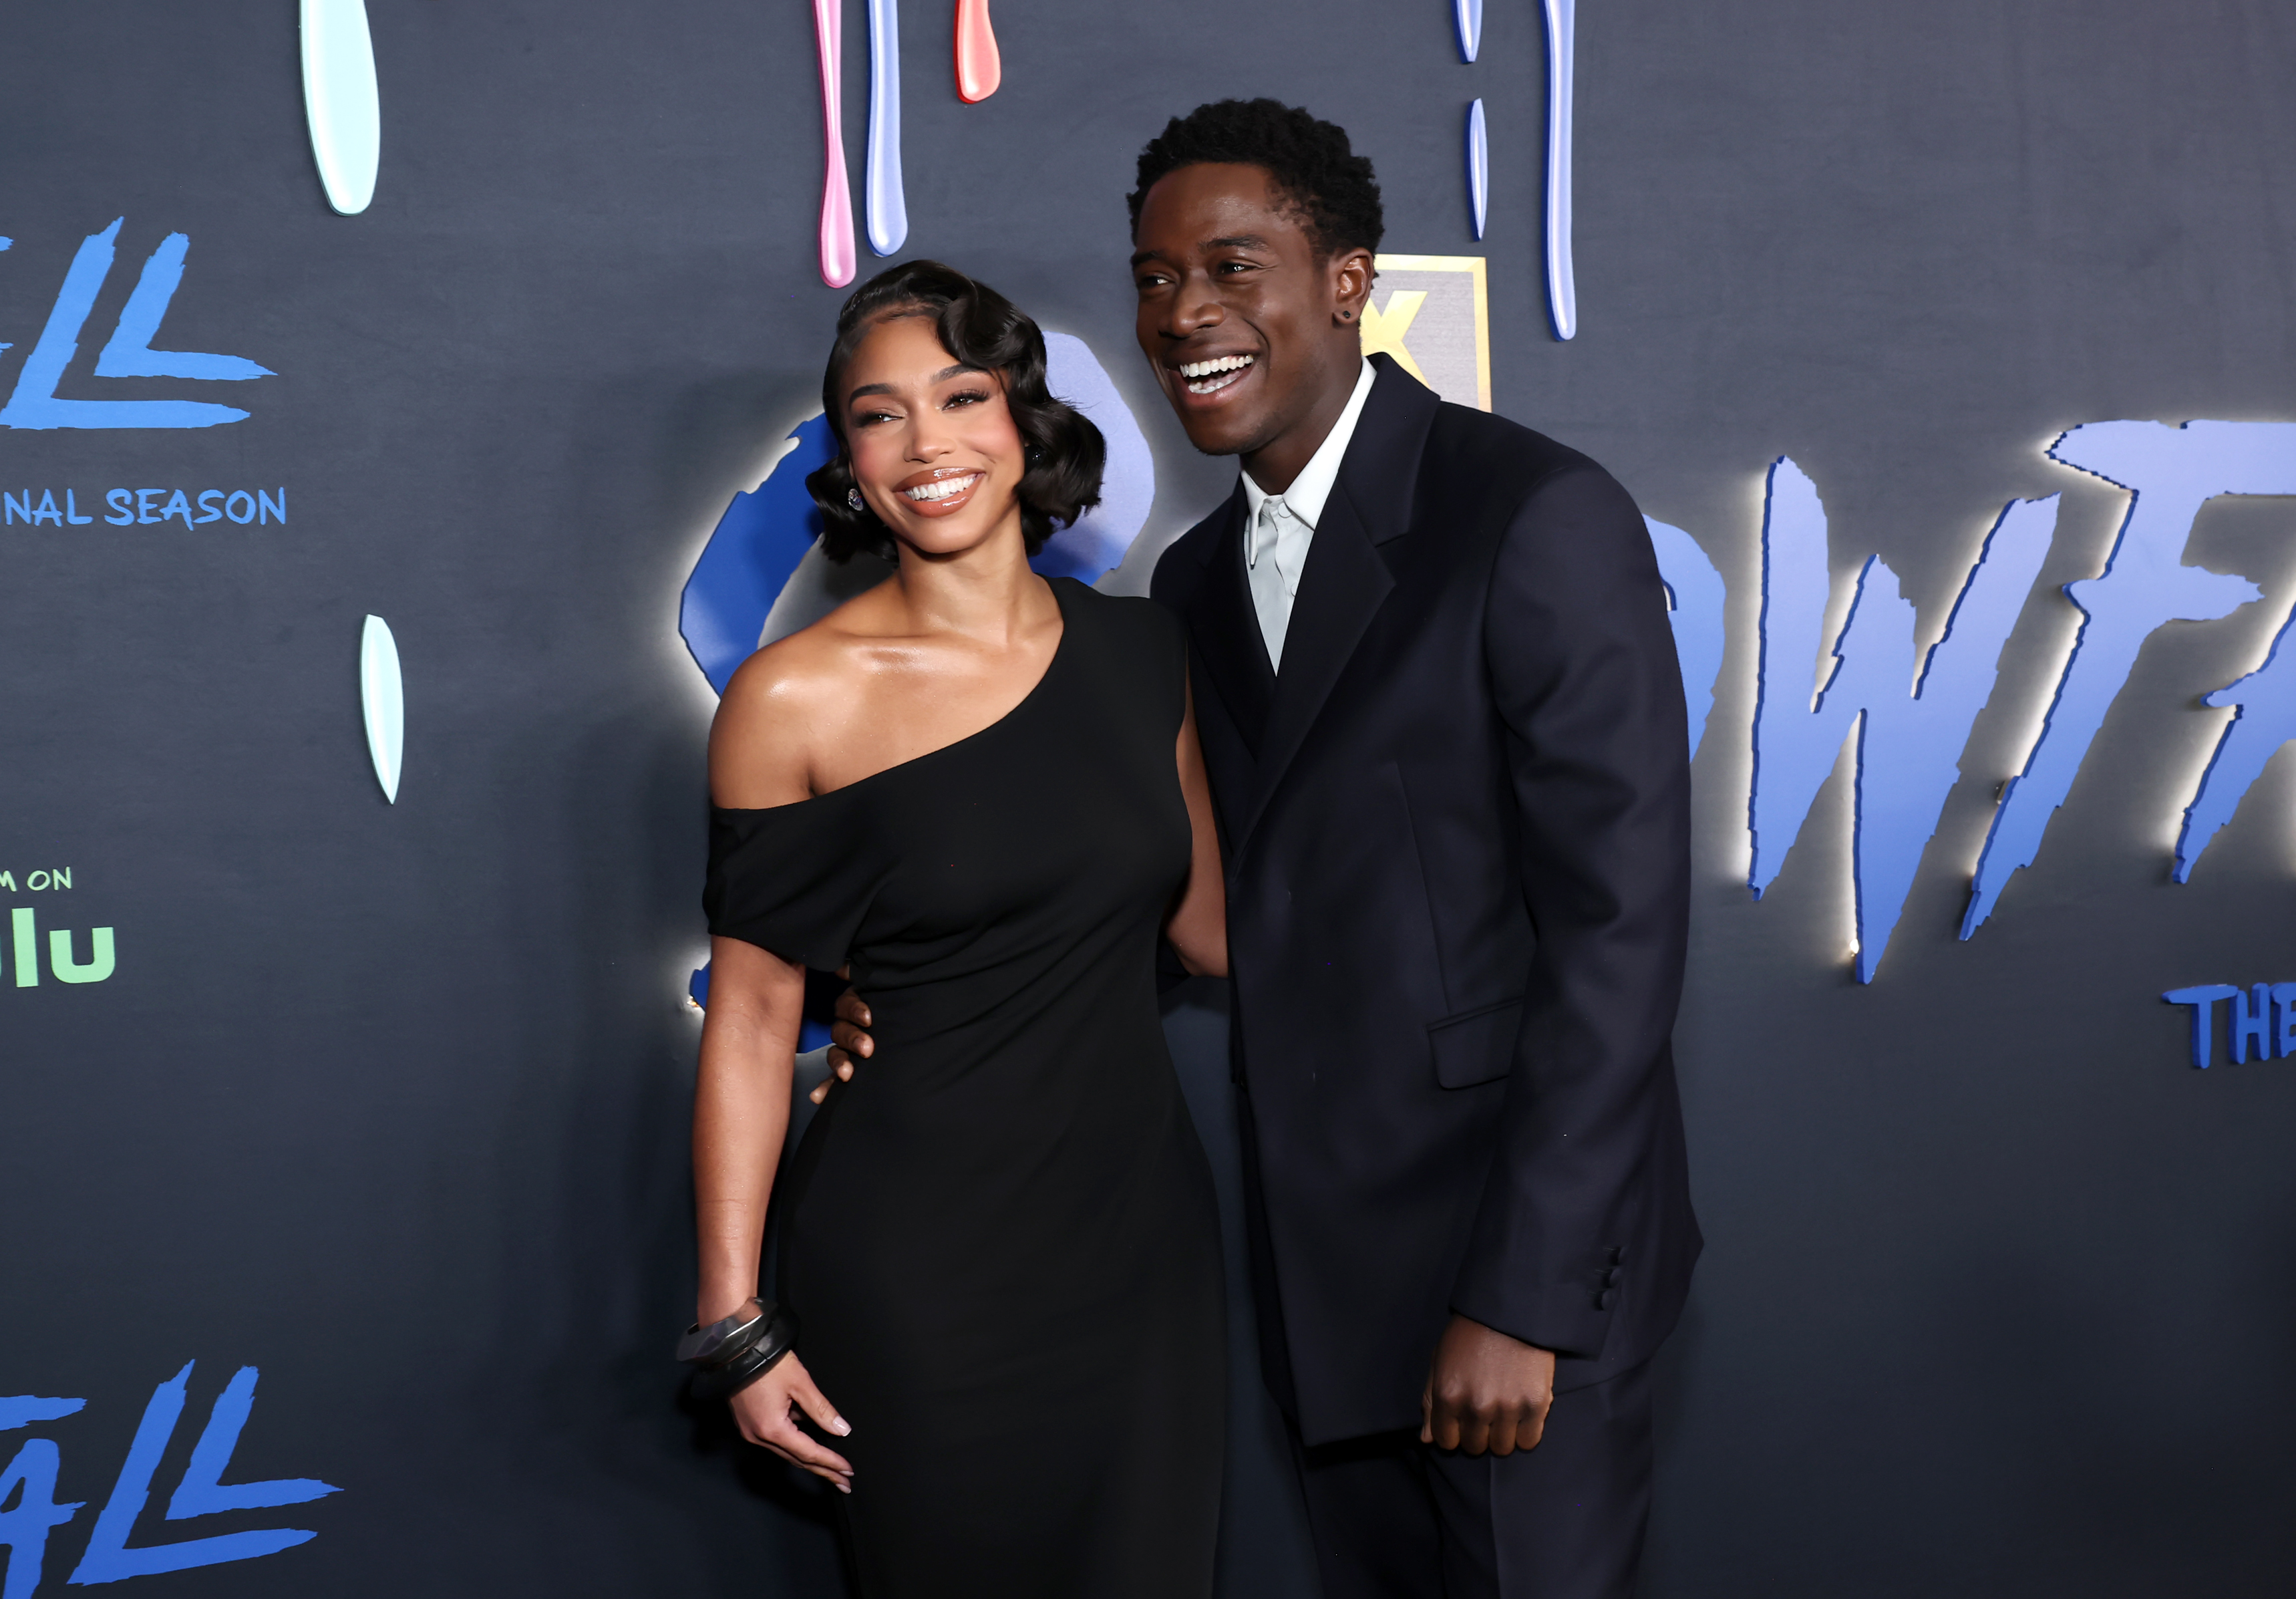 Lori Harvey and Damson Idris attend the Red Carpet Premiere Event for the Sixth and Final Season of FX's "Snowfall" at Academy Museum of Motion Pictures, Ted Mann Theater on February 15, 2023, in Los Angeles, California | Source: Getty Images